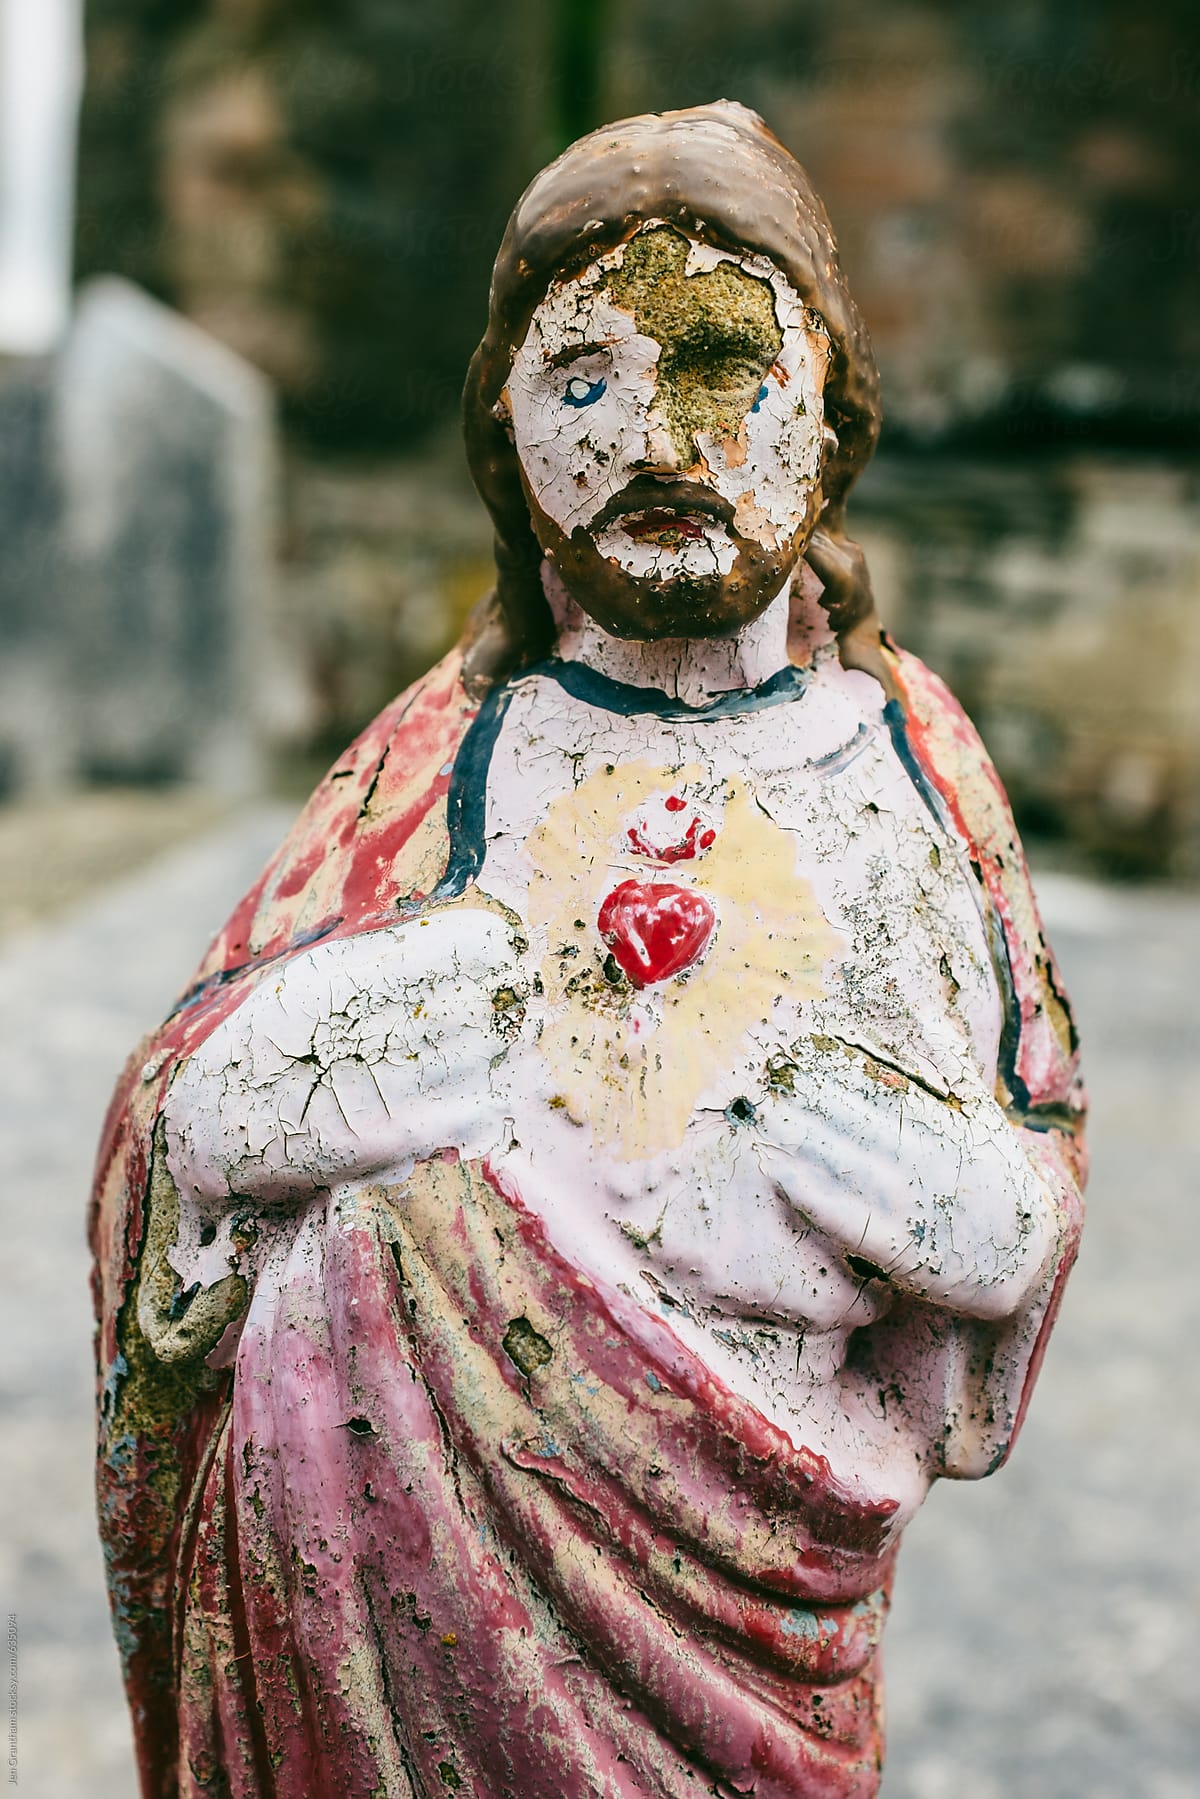 Jesus figurine in an old cemetery